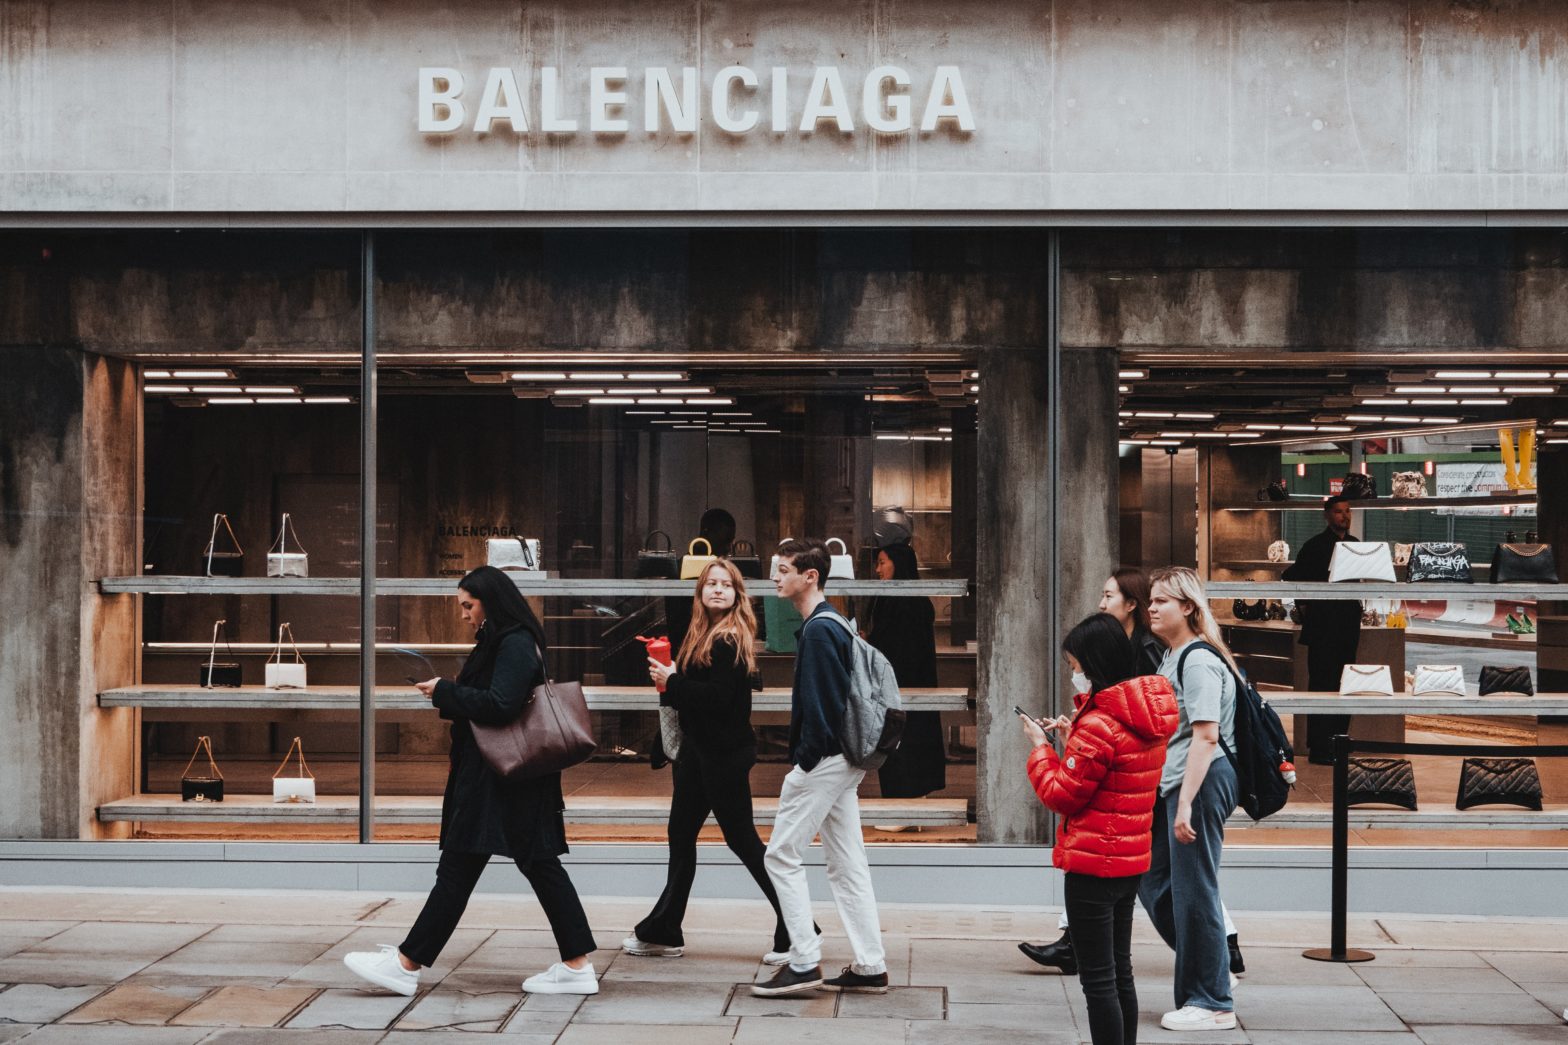 Balenciaga Stores Vandalized Following Ad Campaign Featuring BDSM And Children